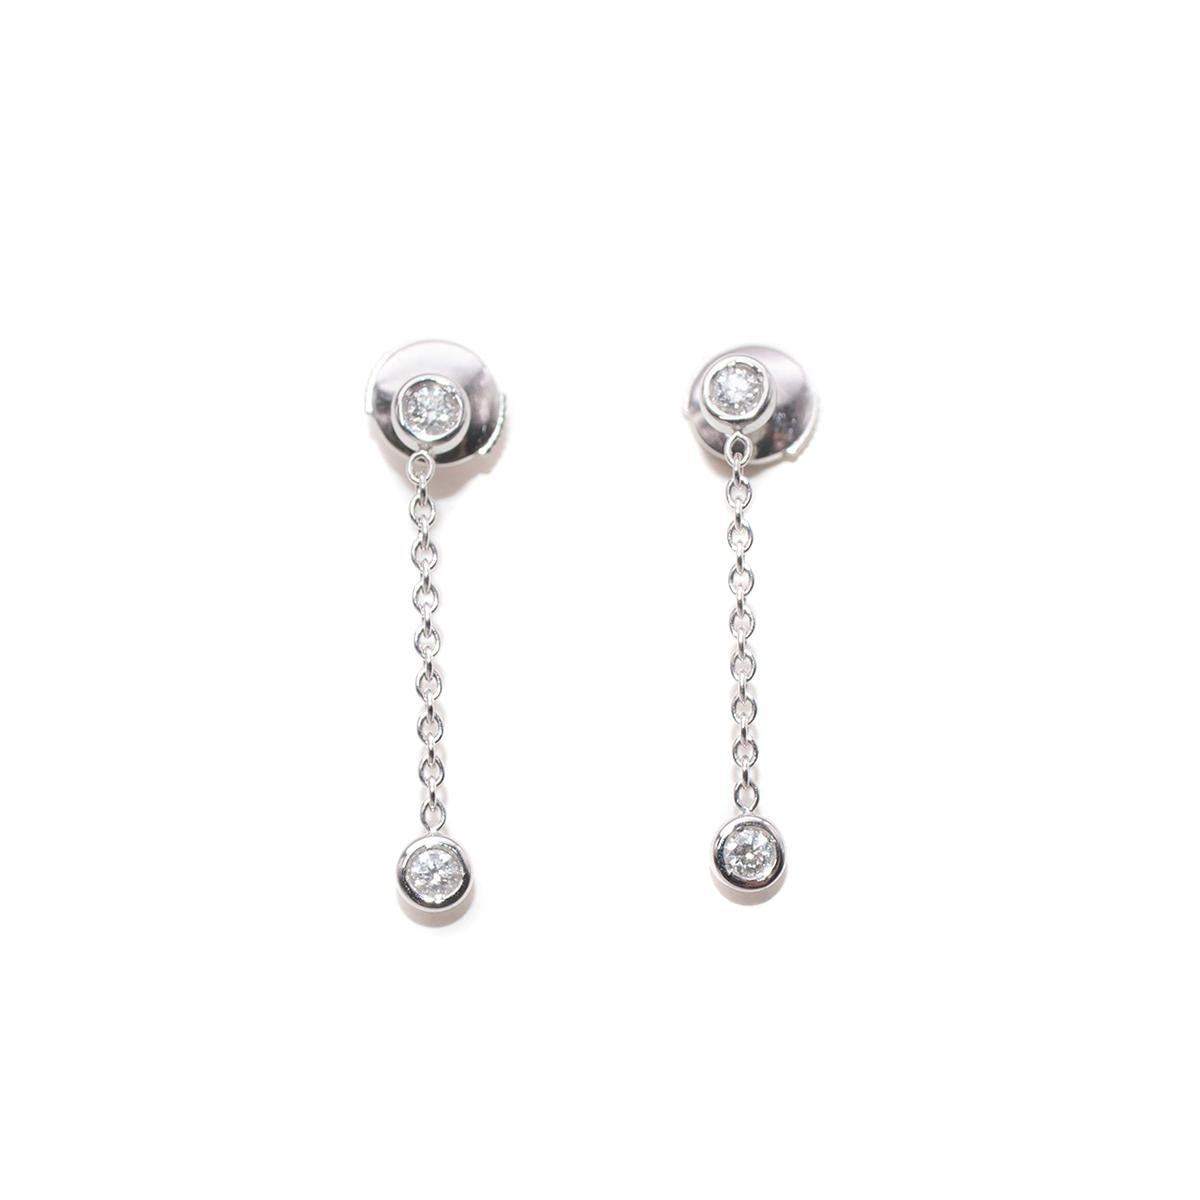 Dior Joaillerie 18k White Gold Chain Drop Diamond Stud Earrings

- 18k white gold earrings feature a long chain drop crafted from fine links adorned with a tiny brilliant-cut diamond in the heart of the stud, and base of the drop chain
- Butterfly